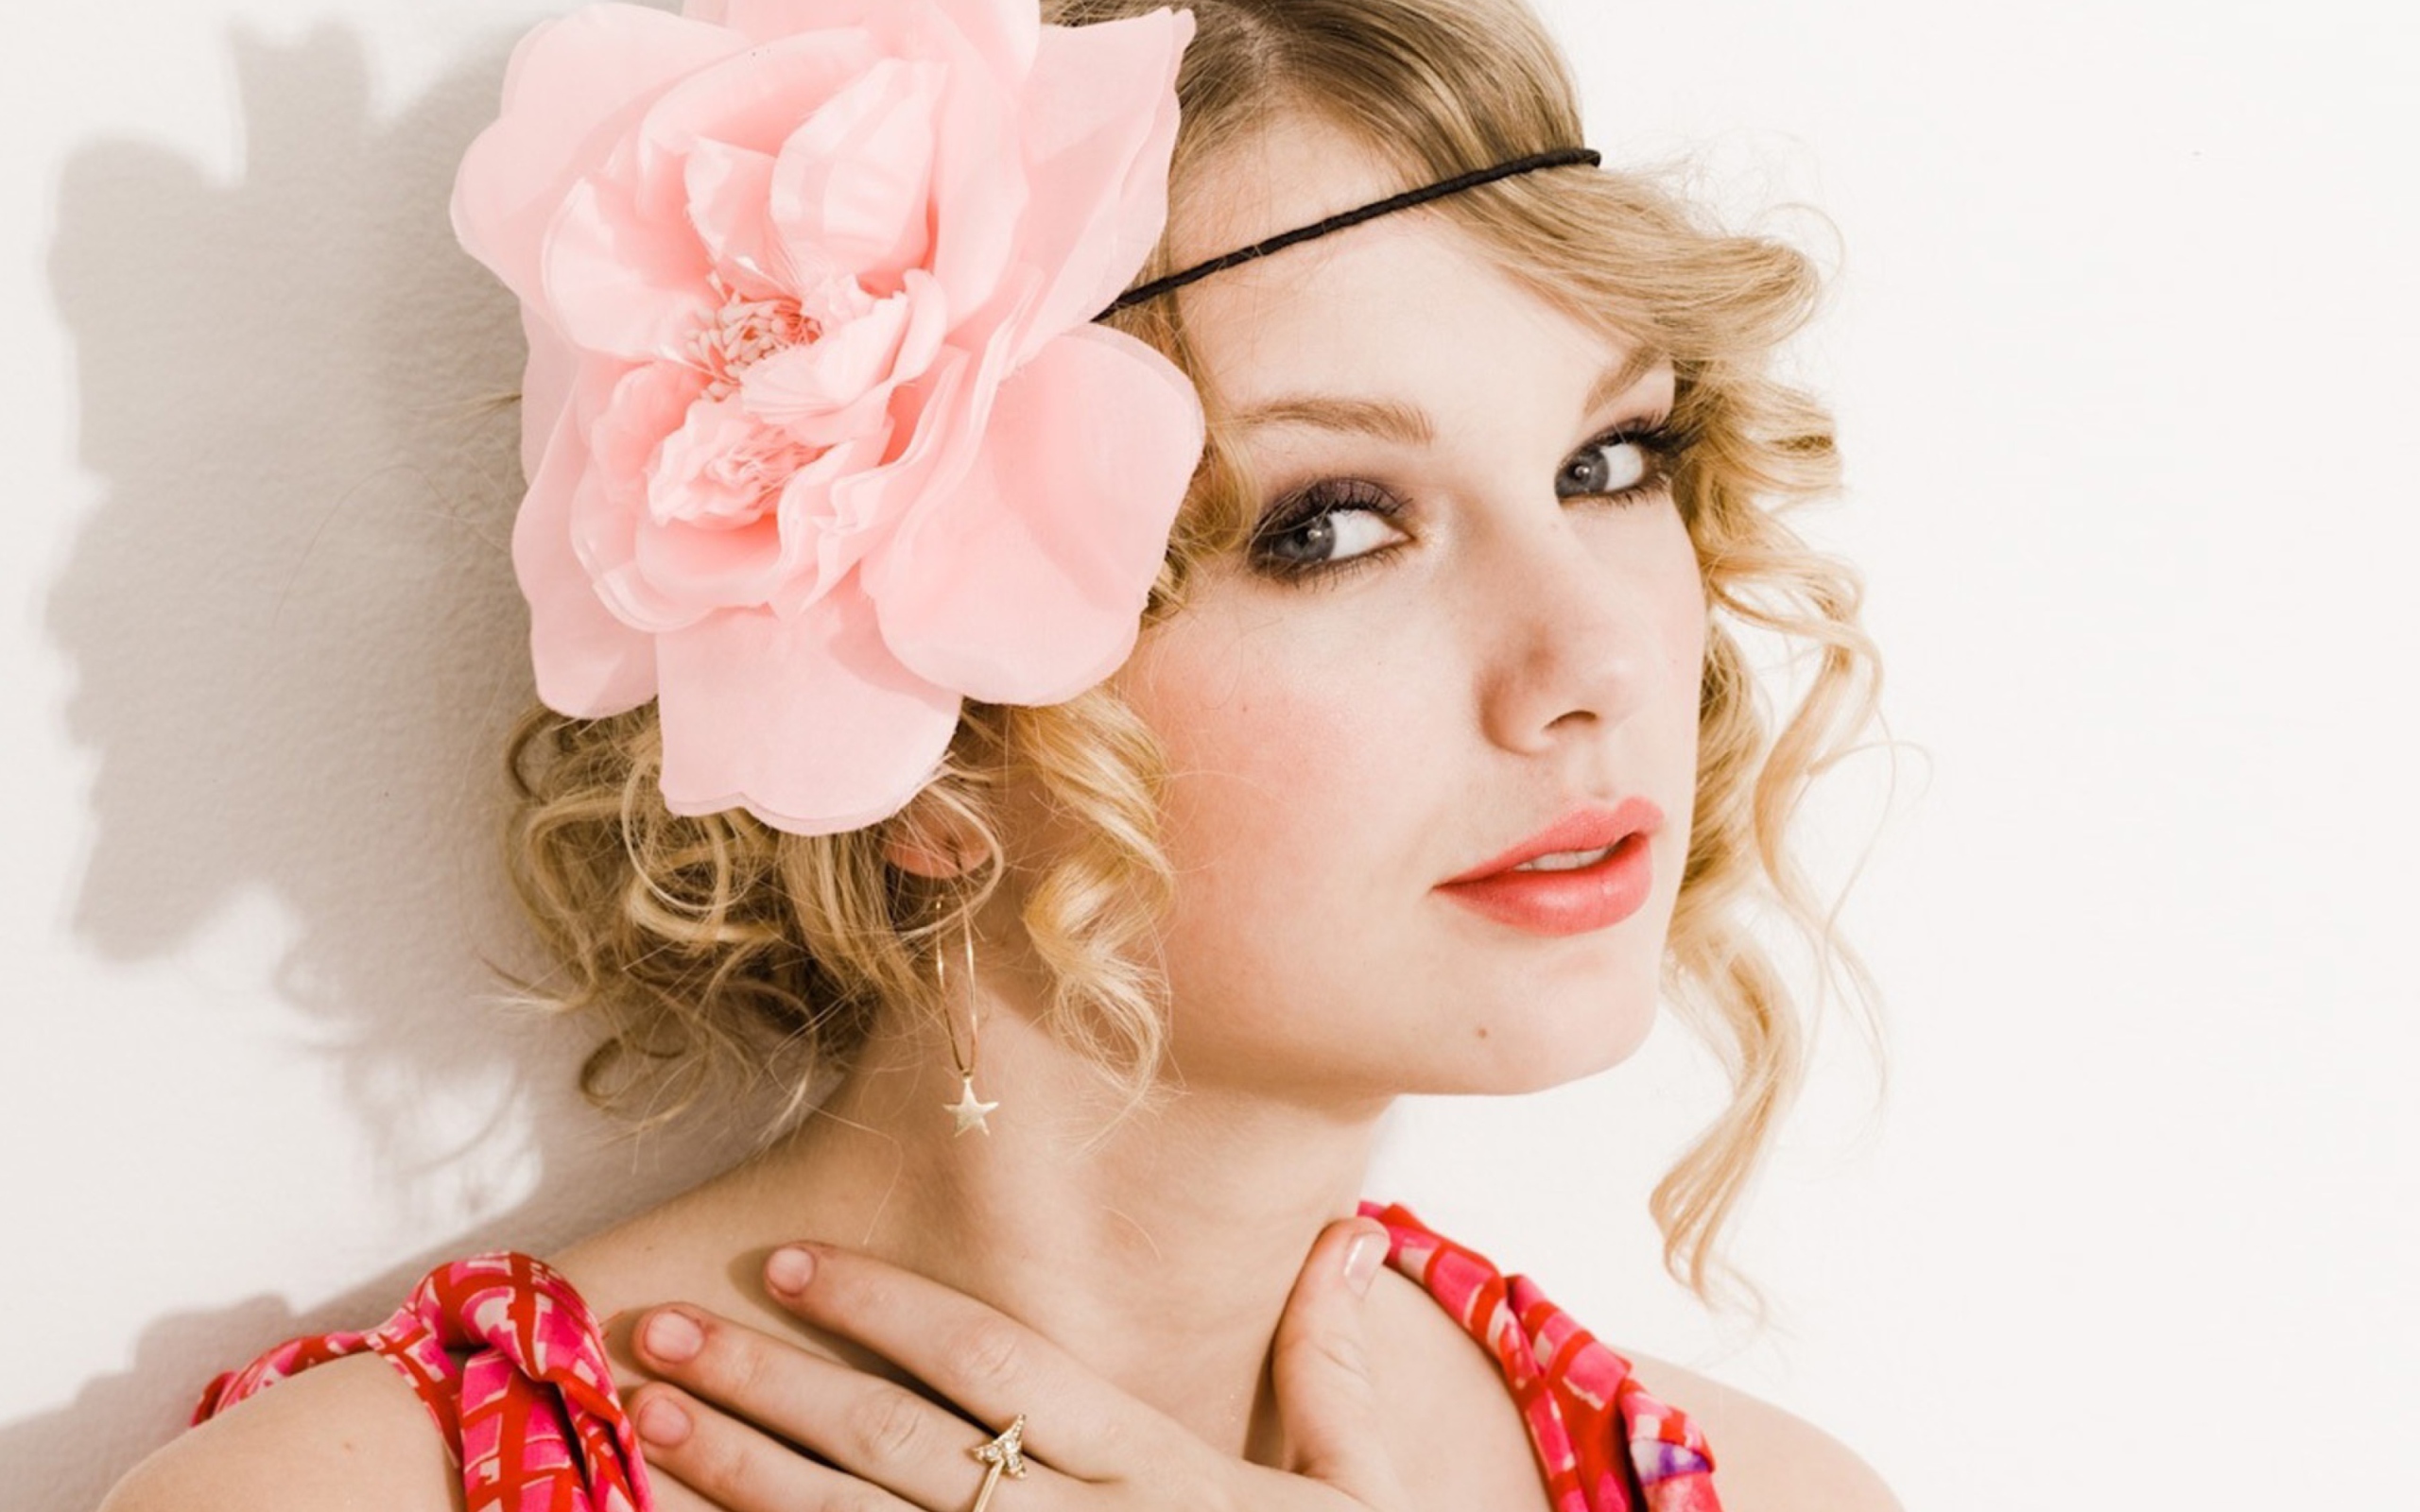 Das Taylor Swift With Pink Rose On Head Wallpaper 2560x1600